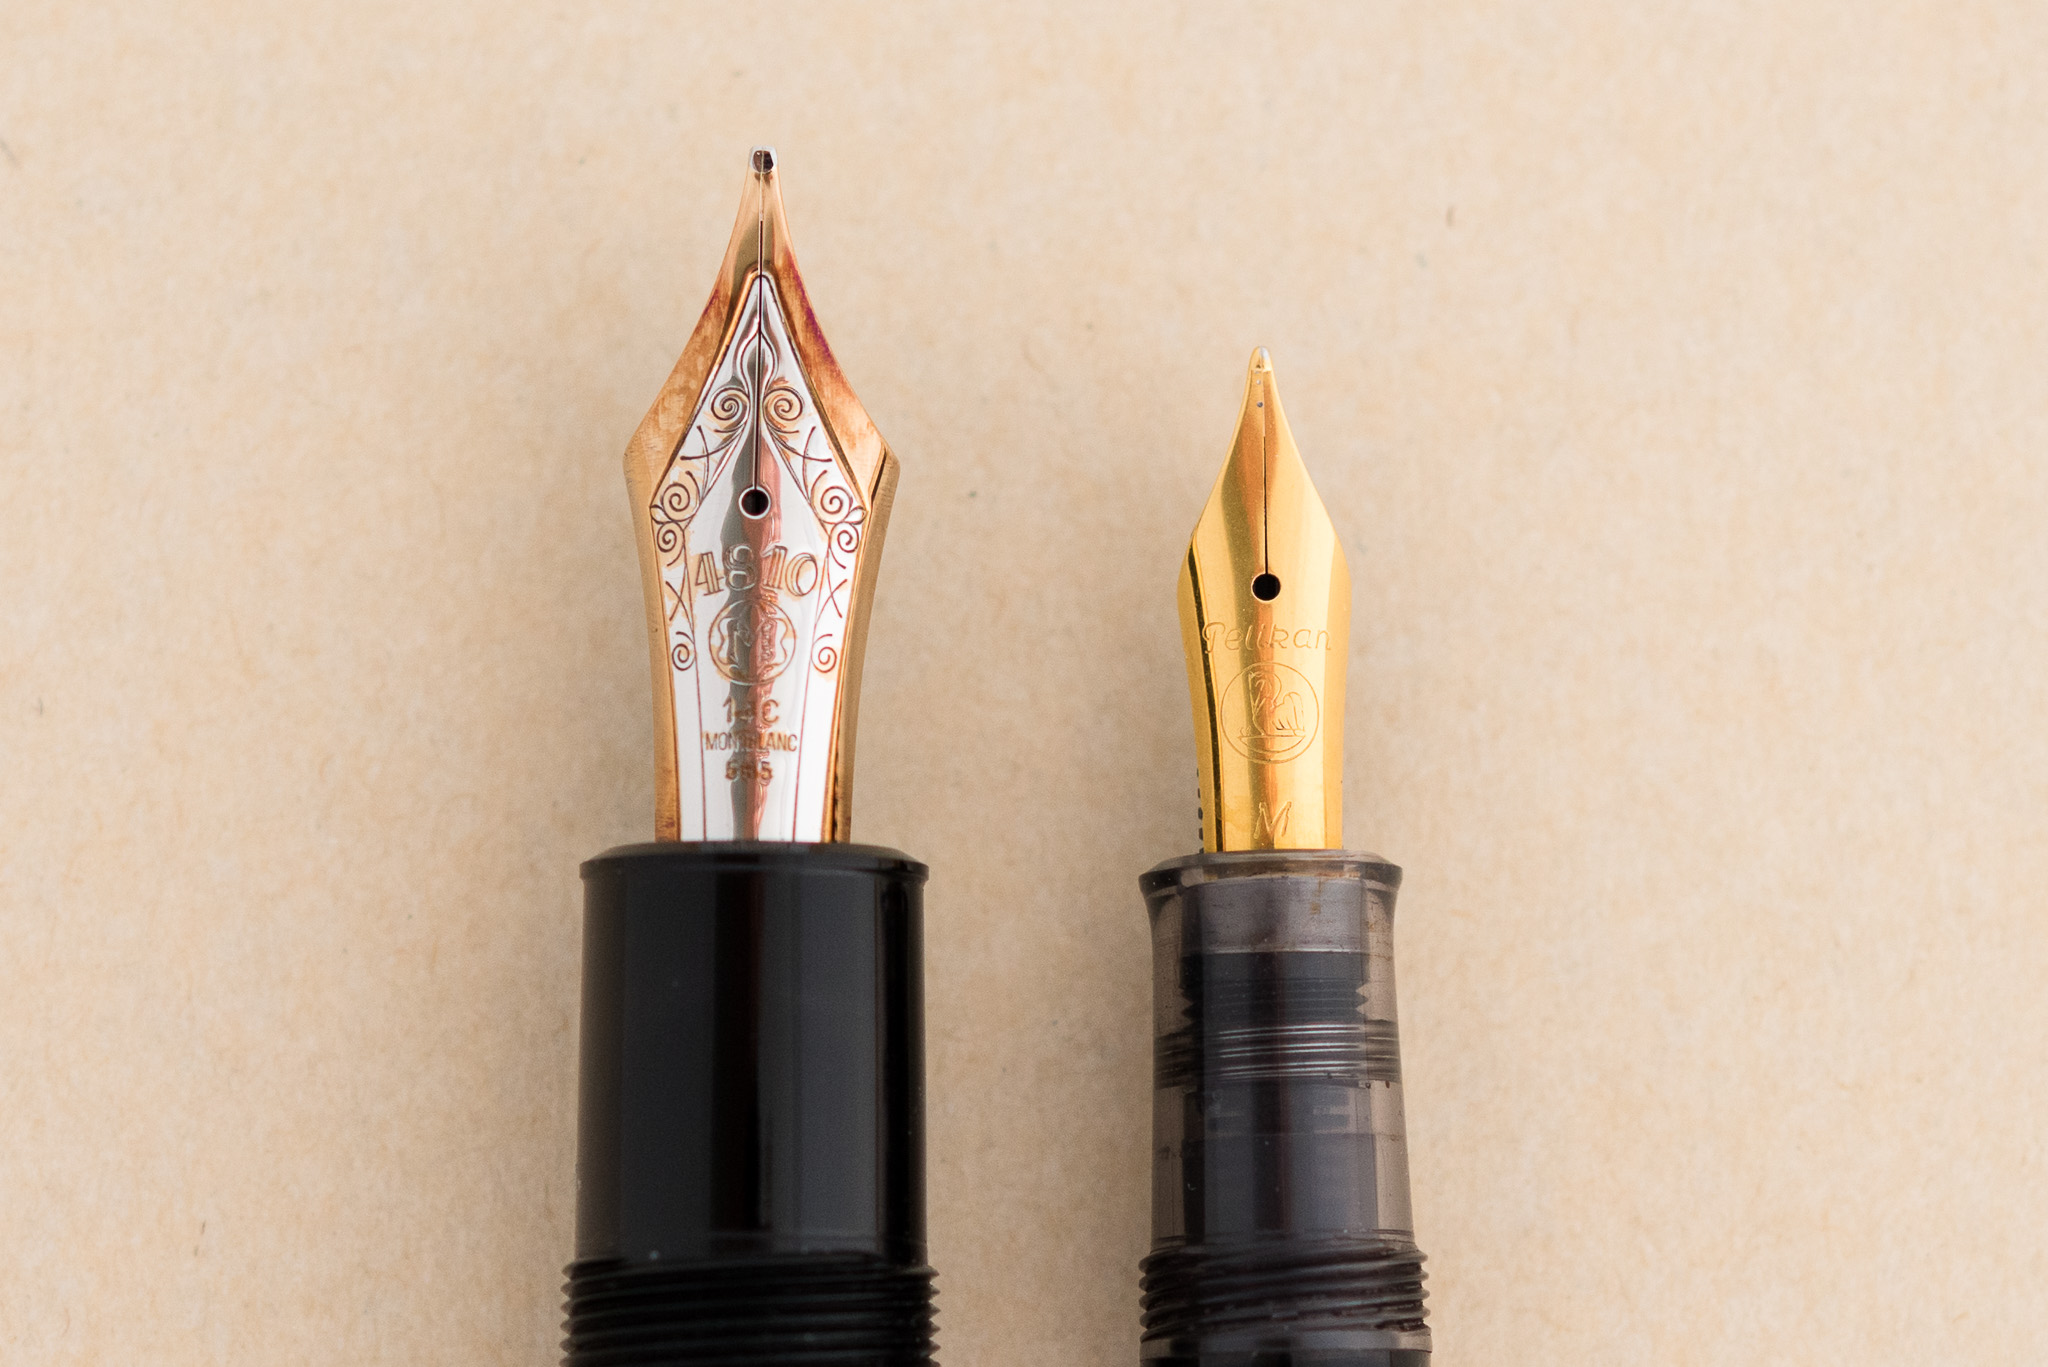 expensive-versus-inexpensive-fountain-pen-difference-9.jpg